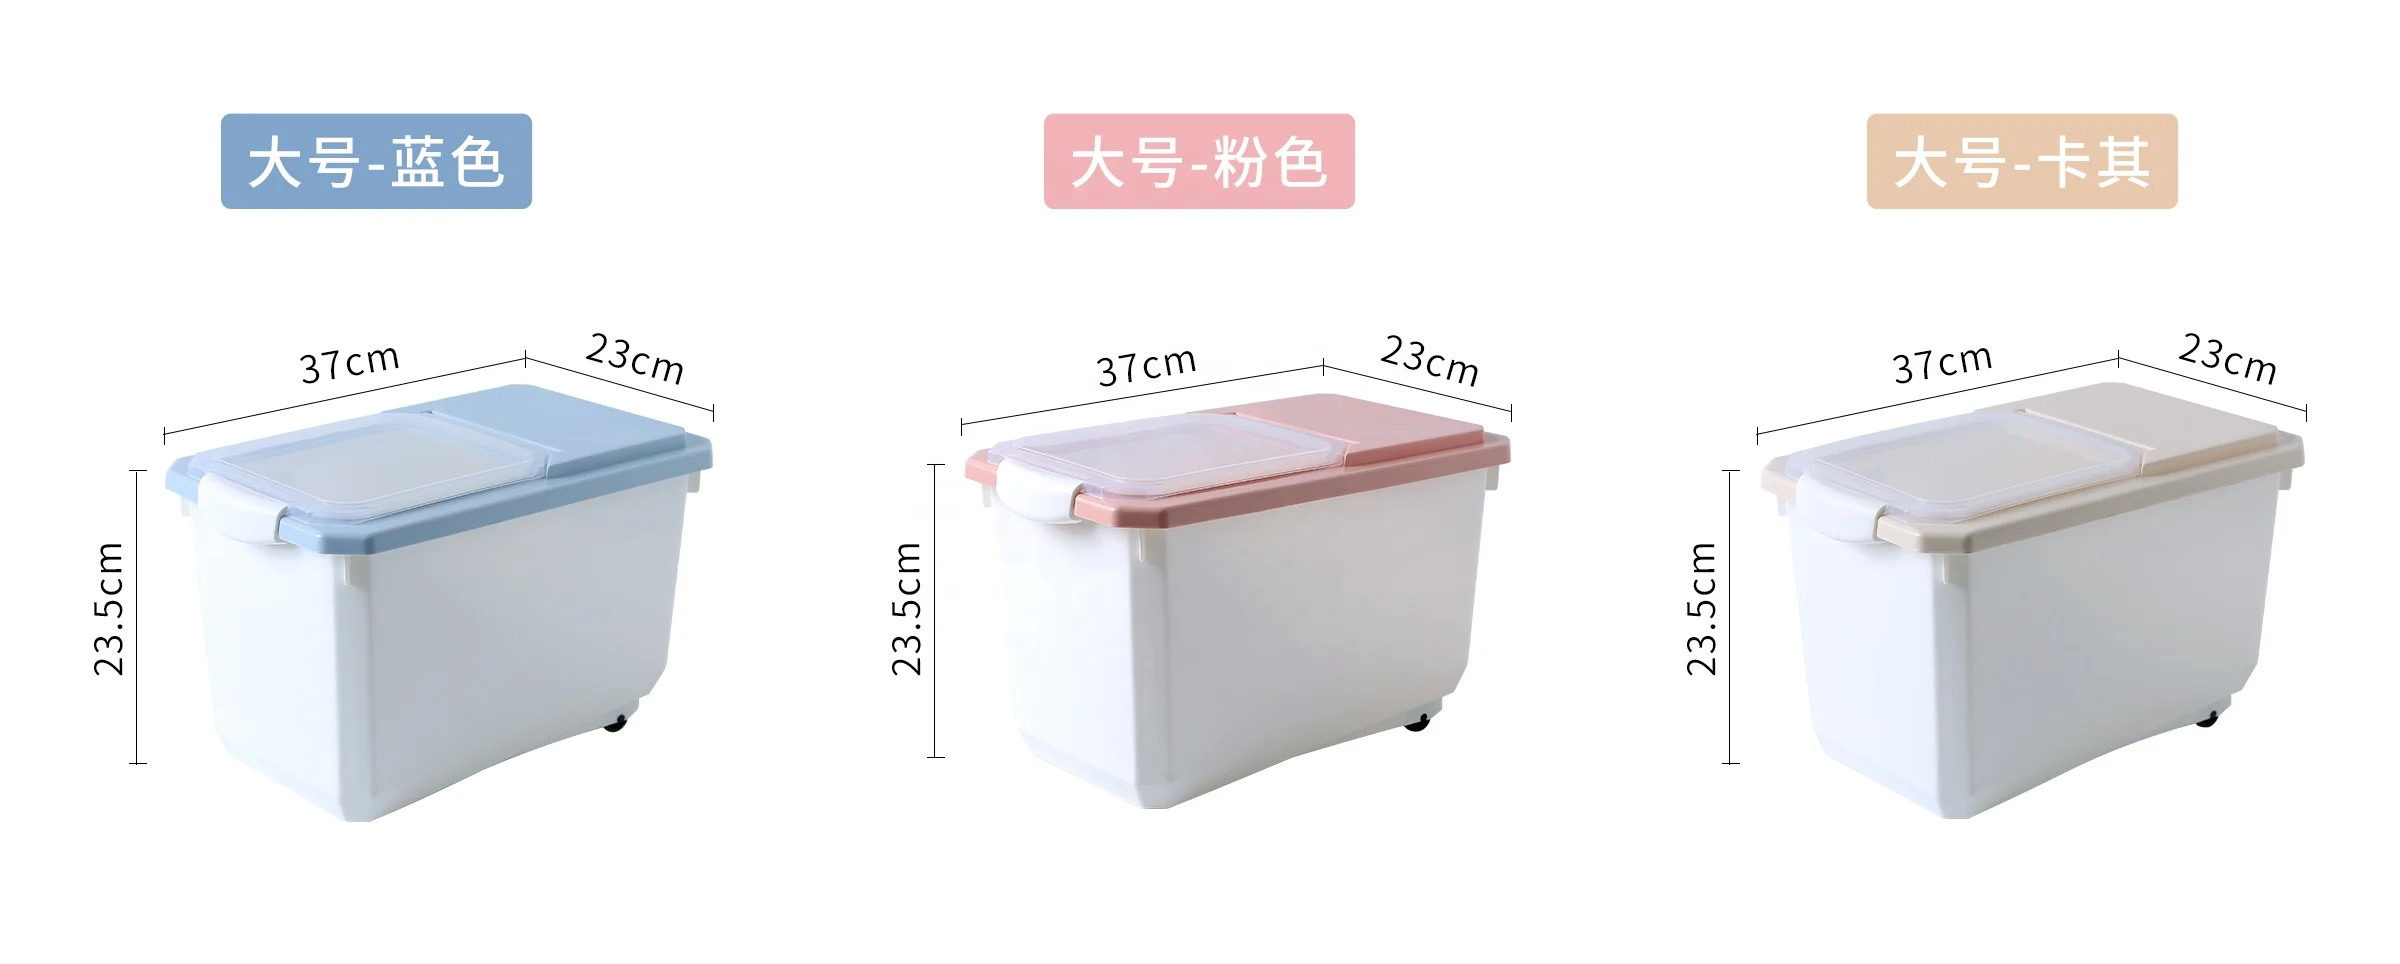 Miscellaneous Grain Nut Candy Fresh With Seal Safety Ring Box Dispenser Rice Kitchen Storage Plastic Set Airtight Food Container